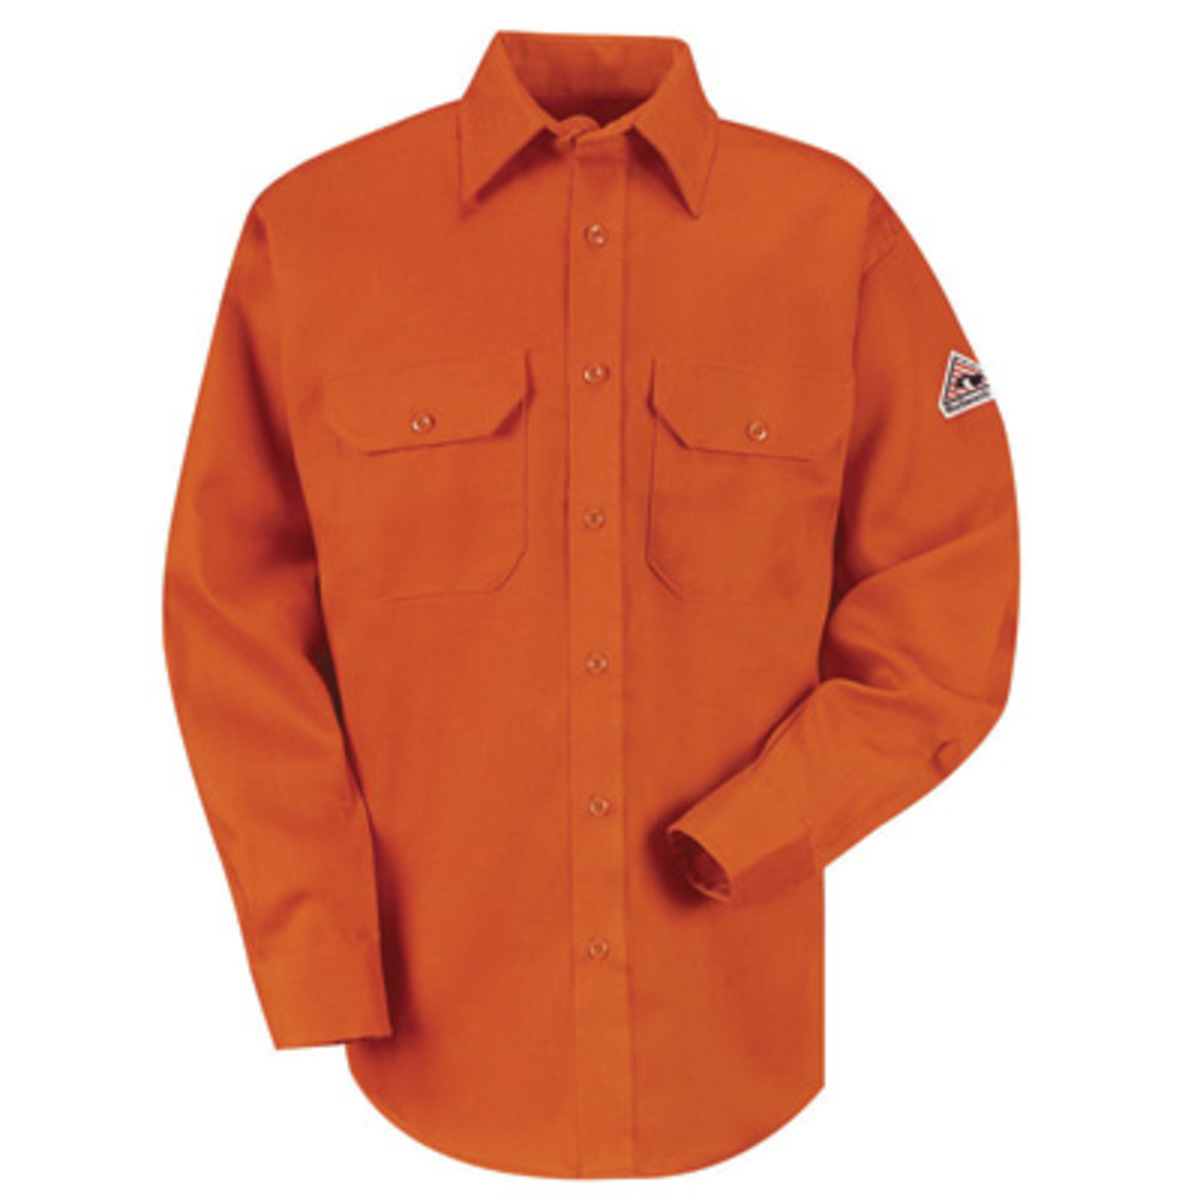 Bulwark® Small| Regular Orange EXCEL FR® ComforTouch® Flame Resistant Uniform Shirt With Button Front Closure